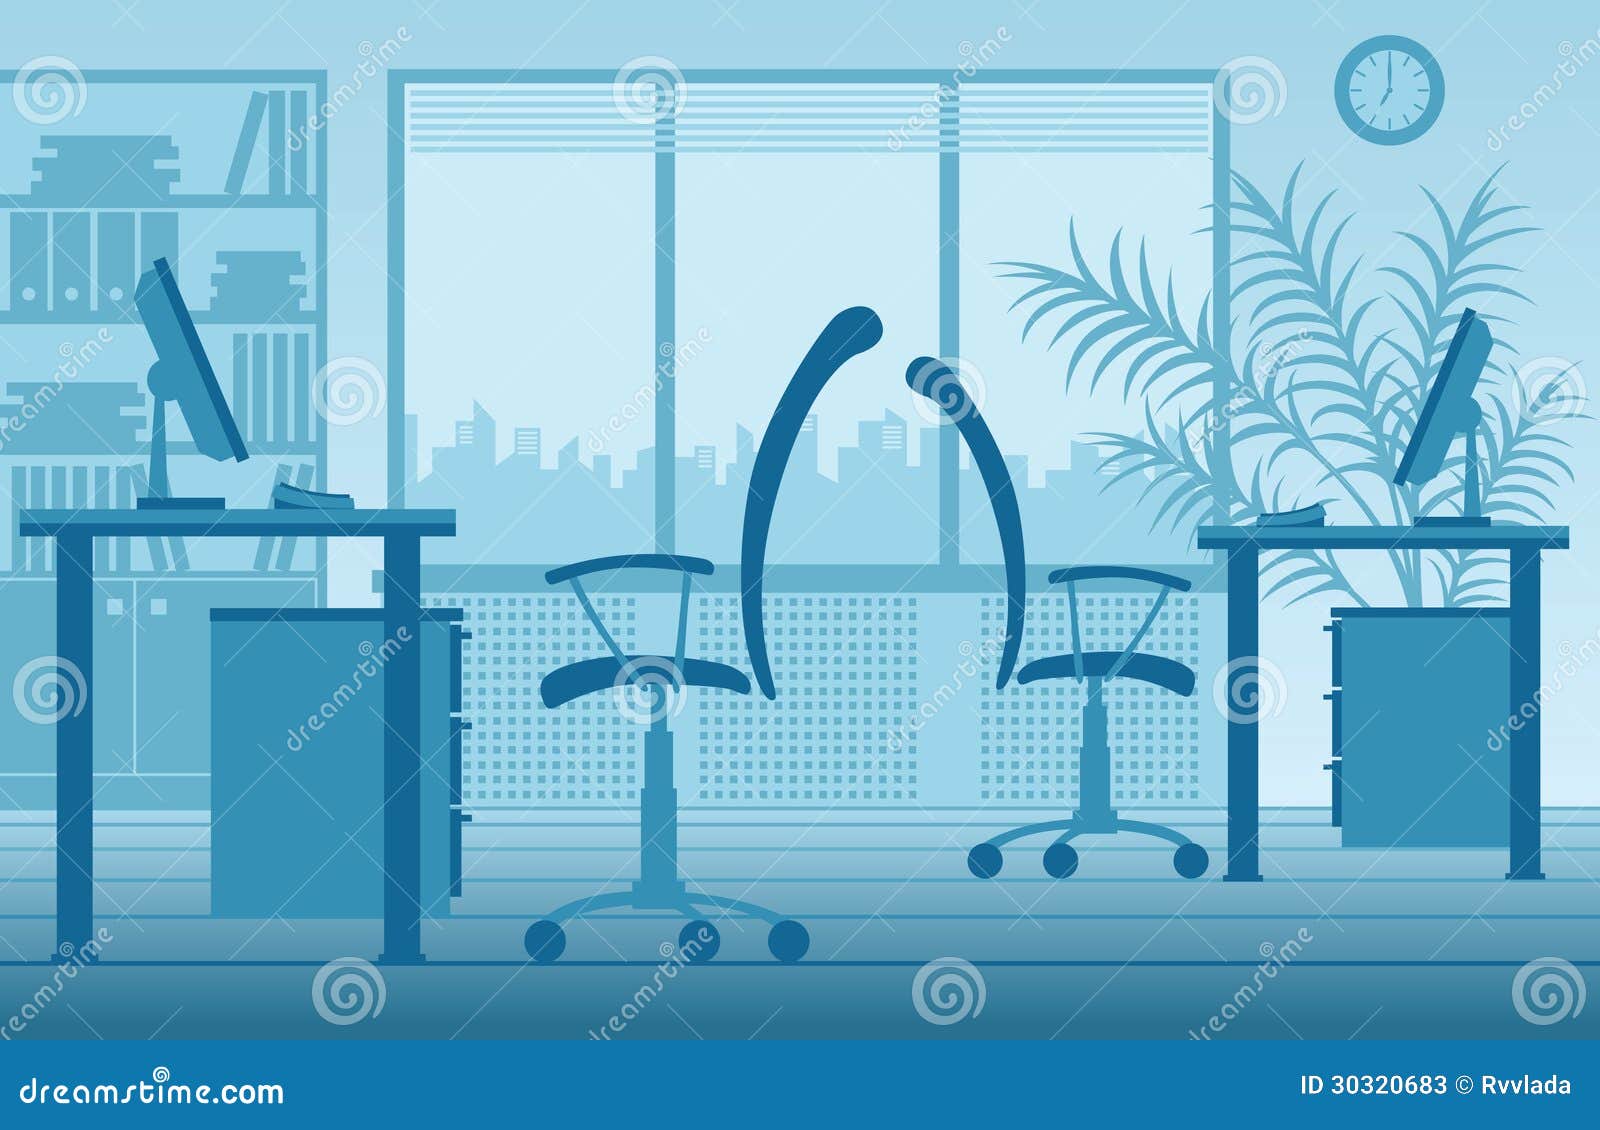 office clipart background - photo #29